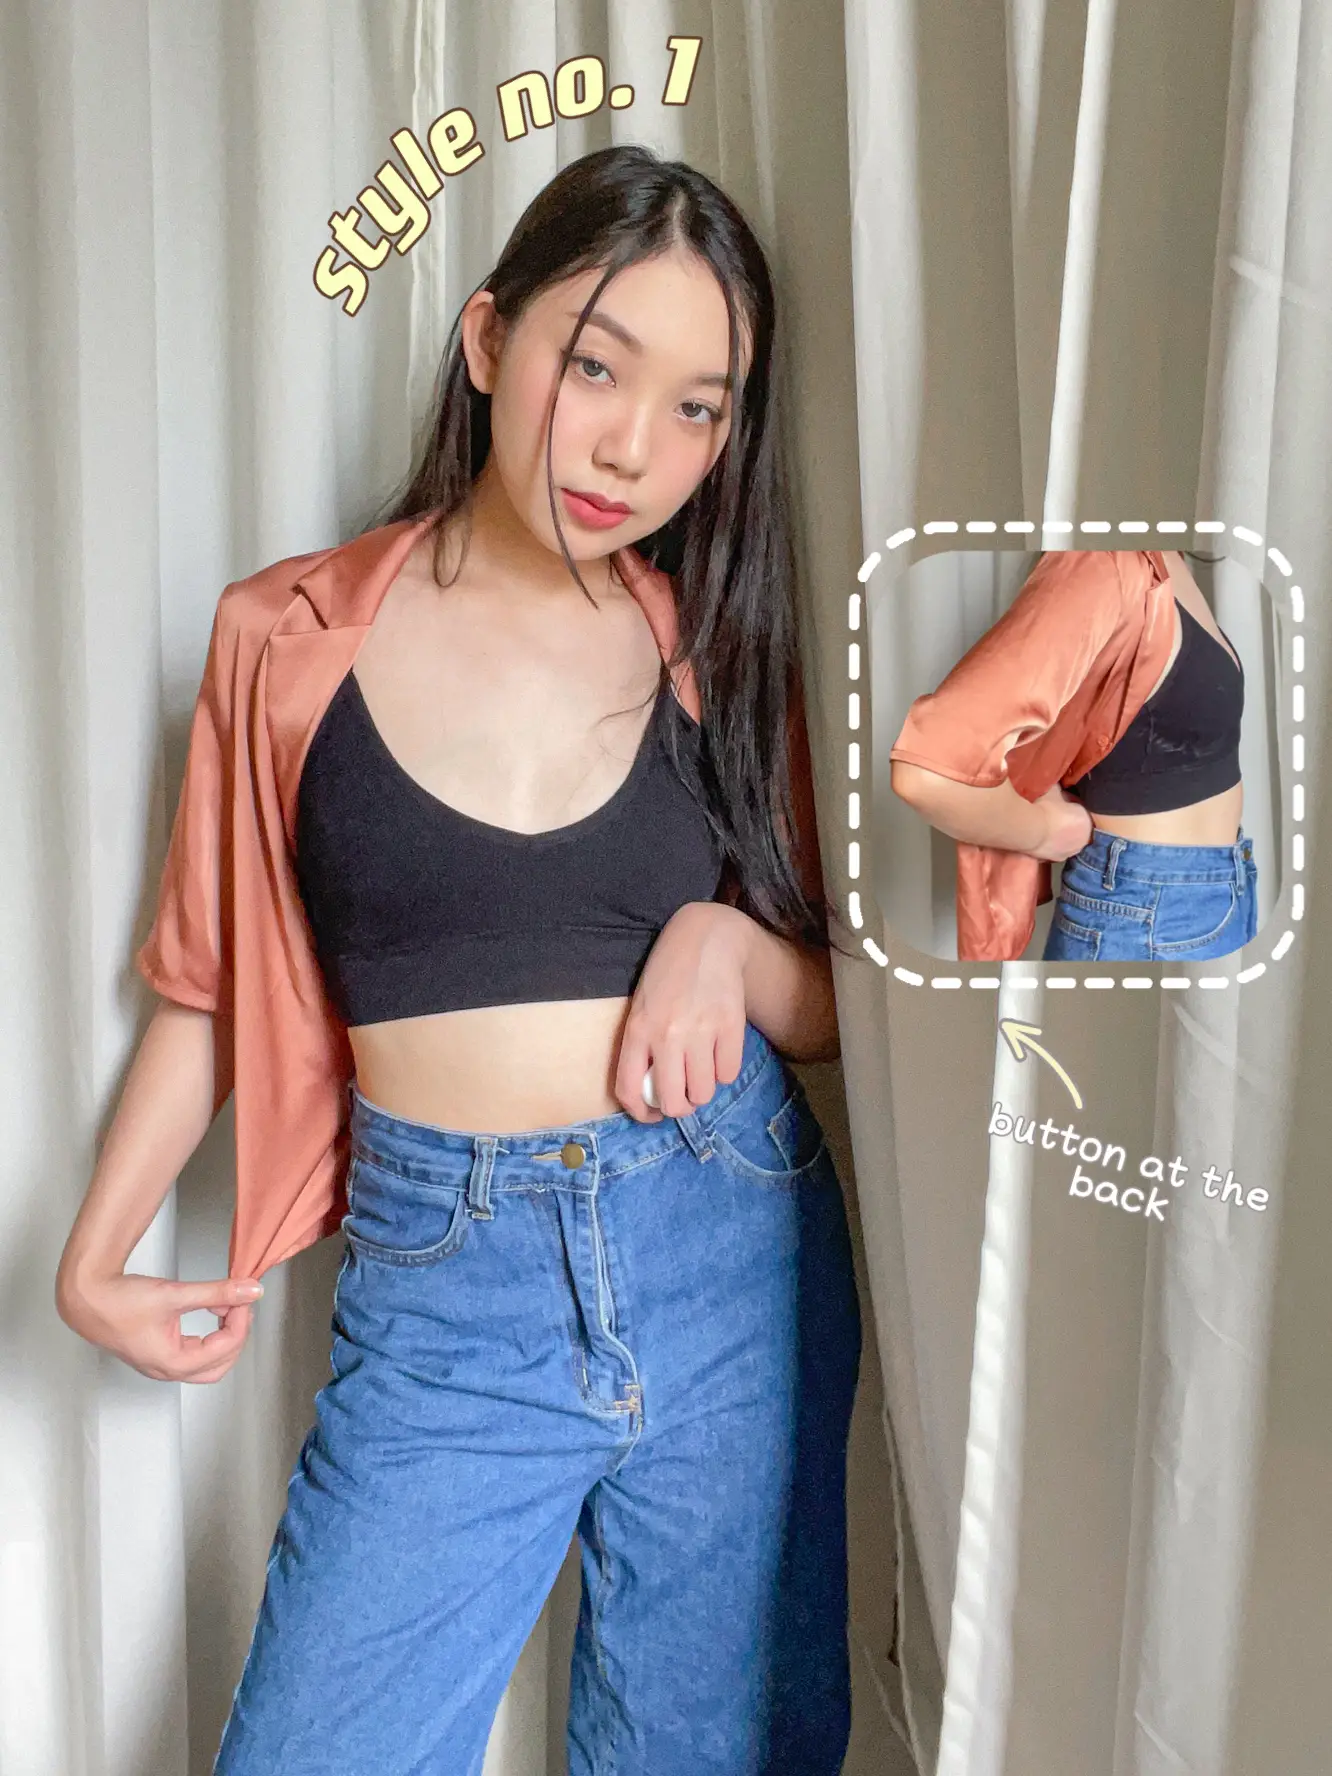 Crop Tops, the Non-Basic Way